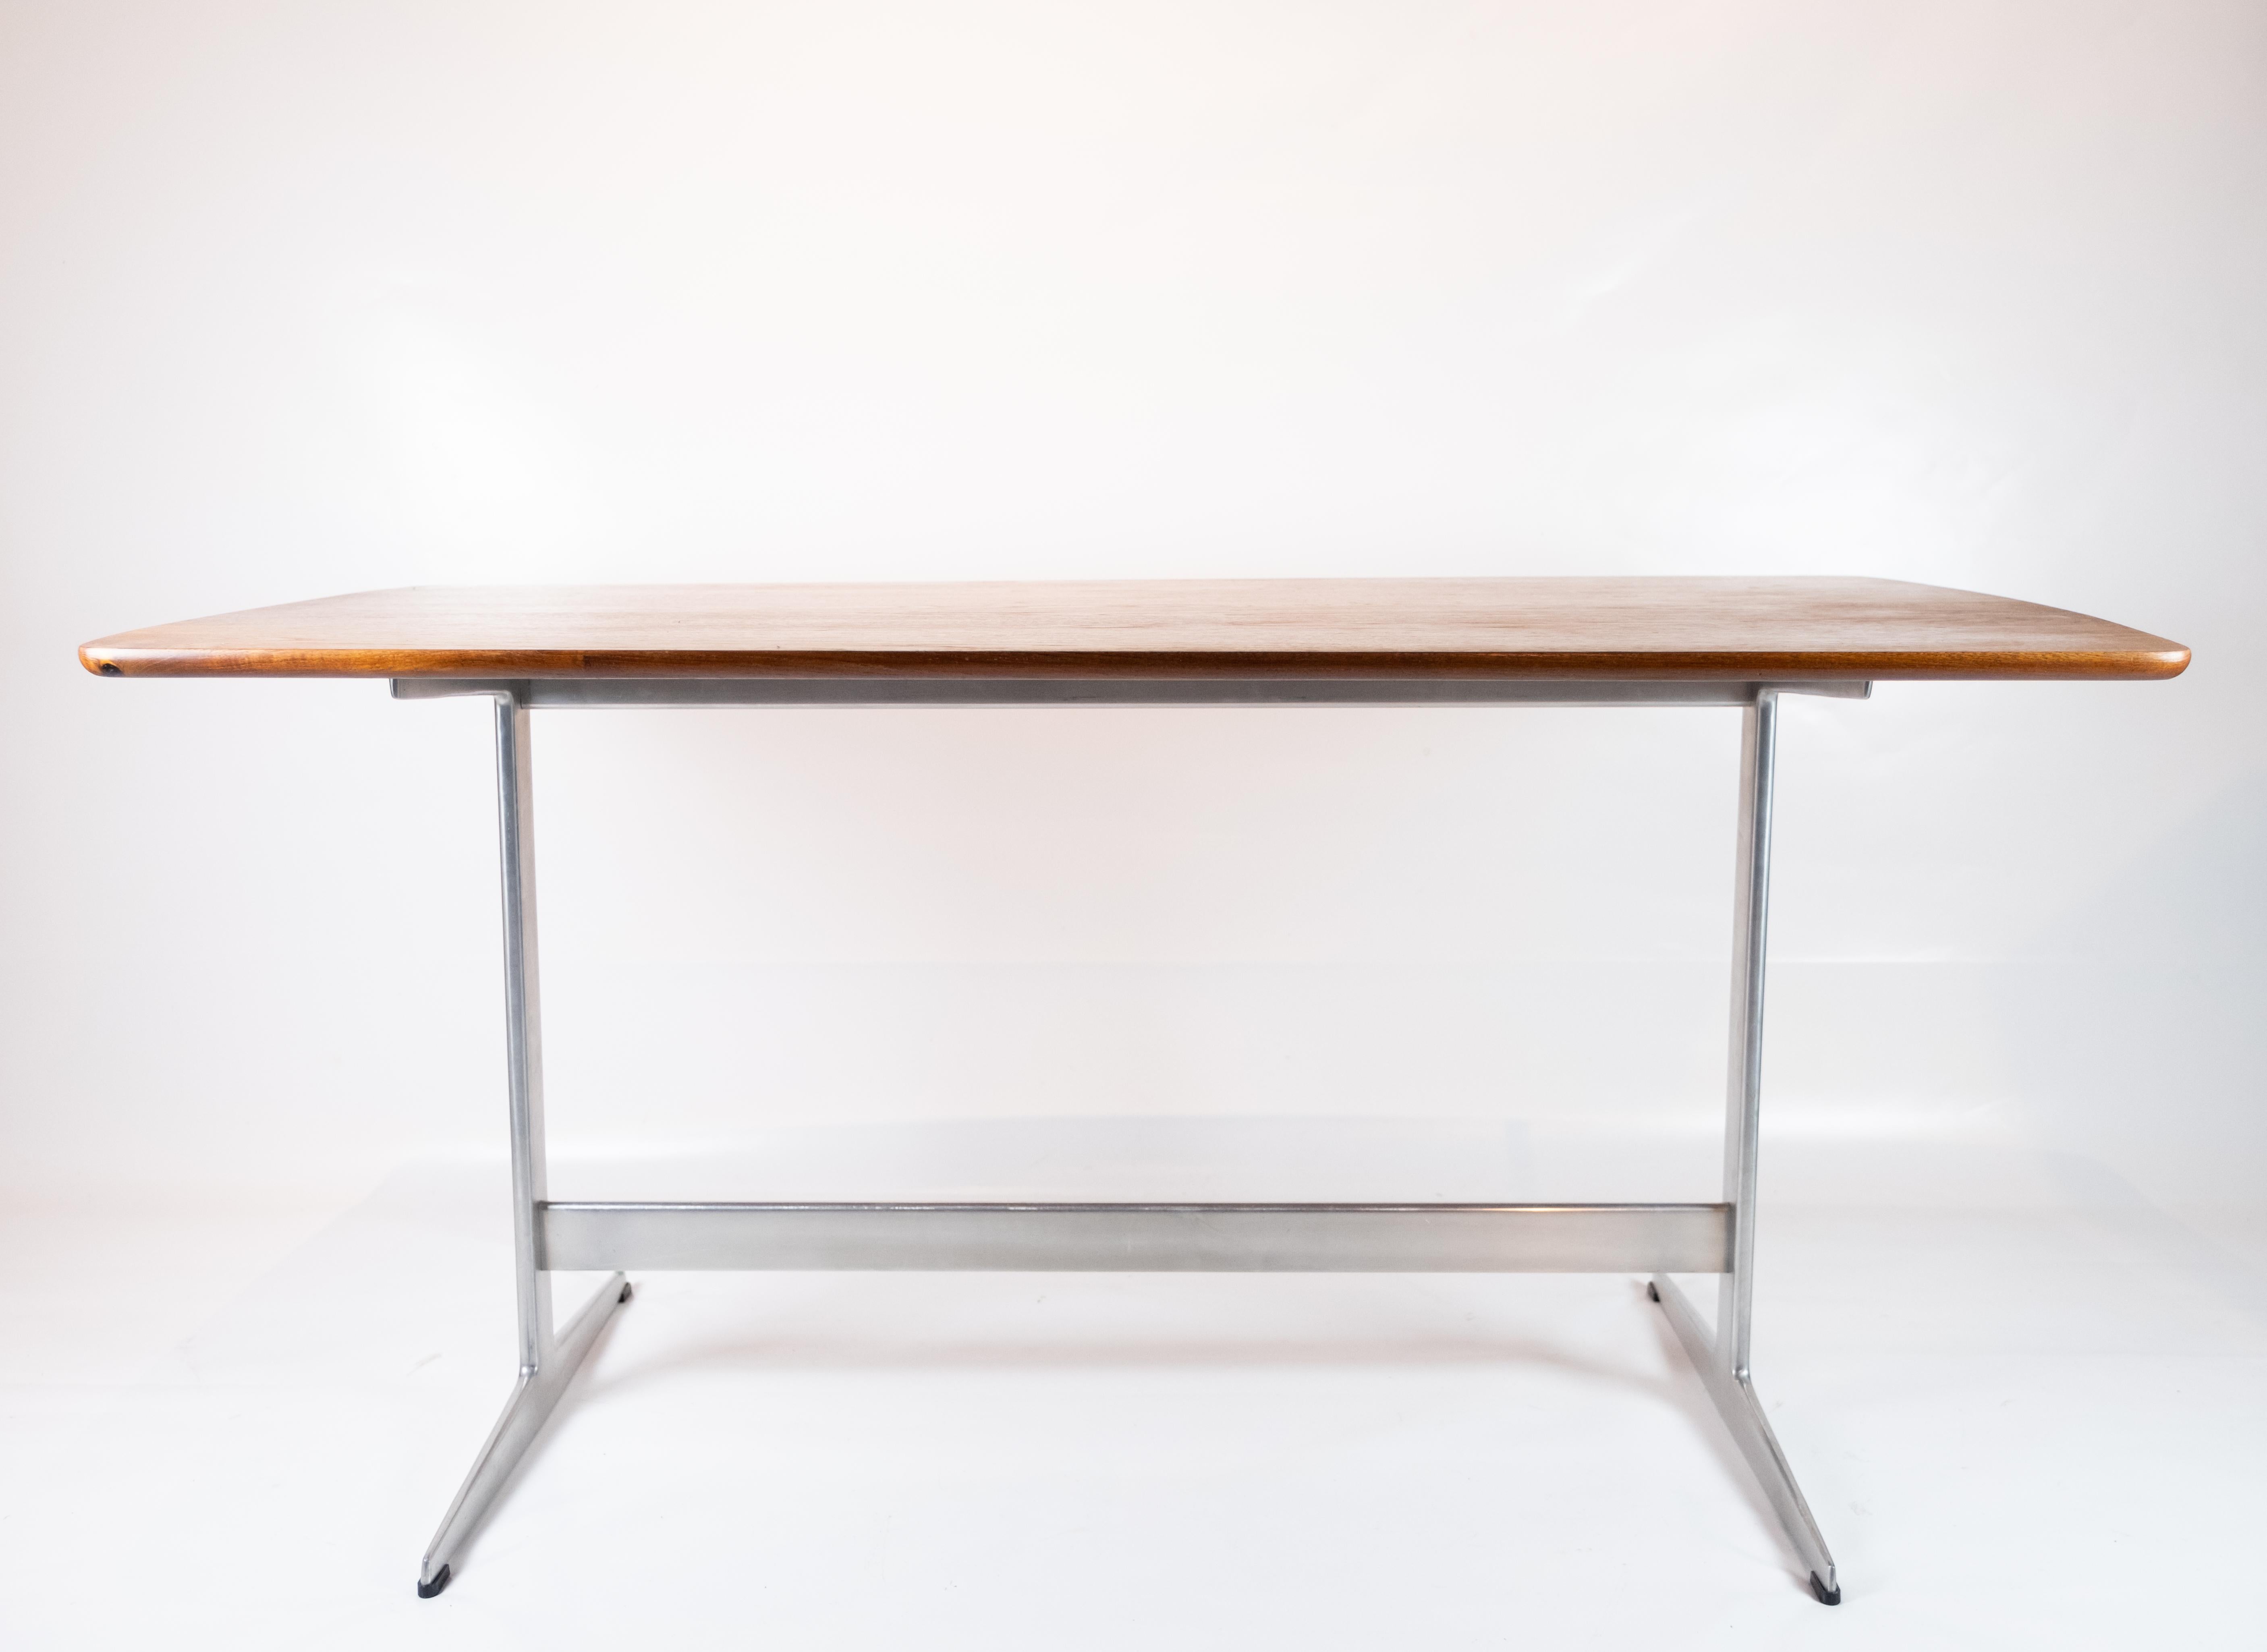 Shaker dining table in teak and frame of metal designed by Arne Jacobsen from the 1960s. The table is in great vintage condition.

This product will be inspected thoroughly at our professional workshop by our educated employees, who assure the